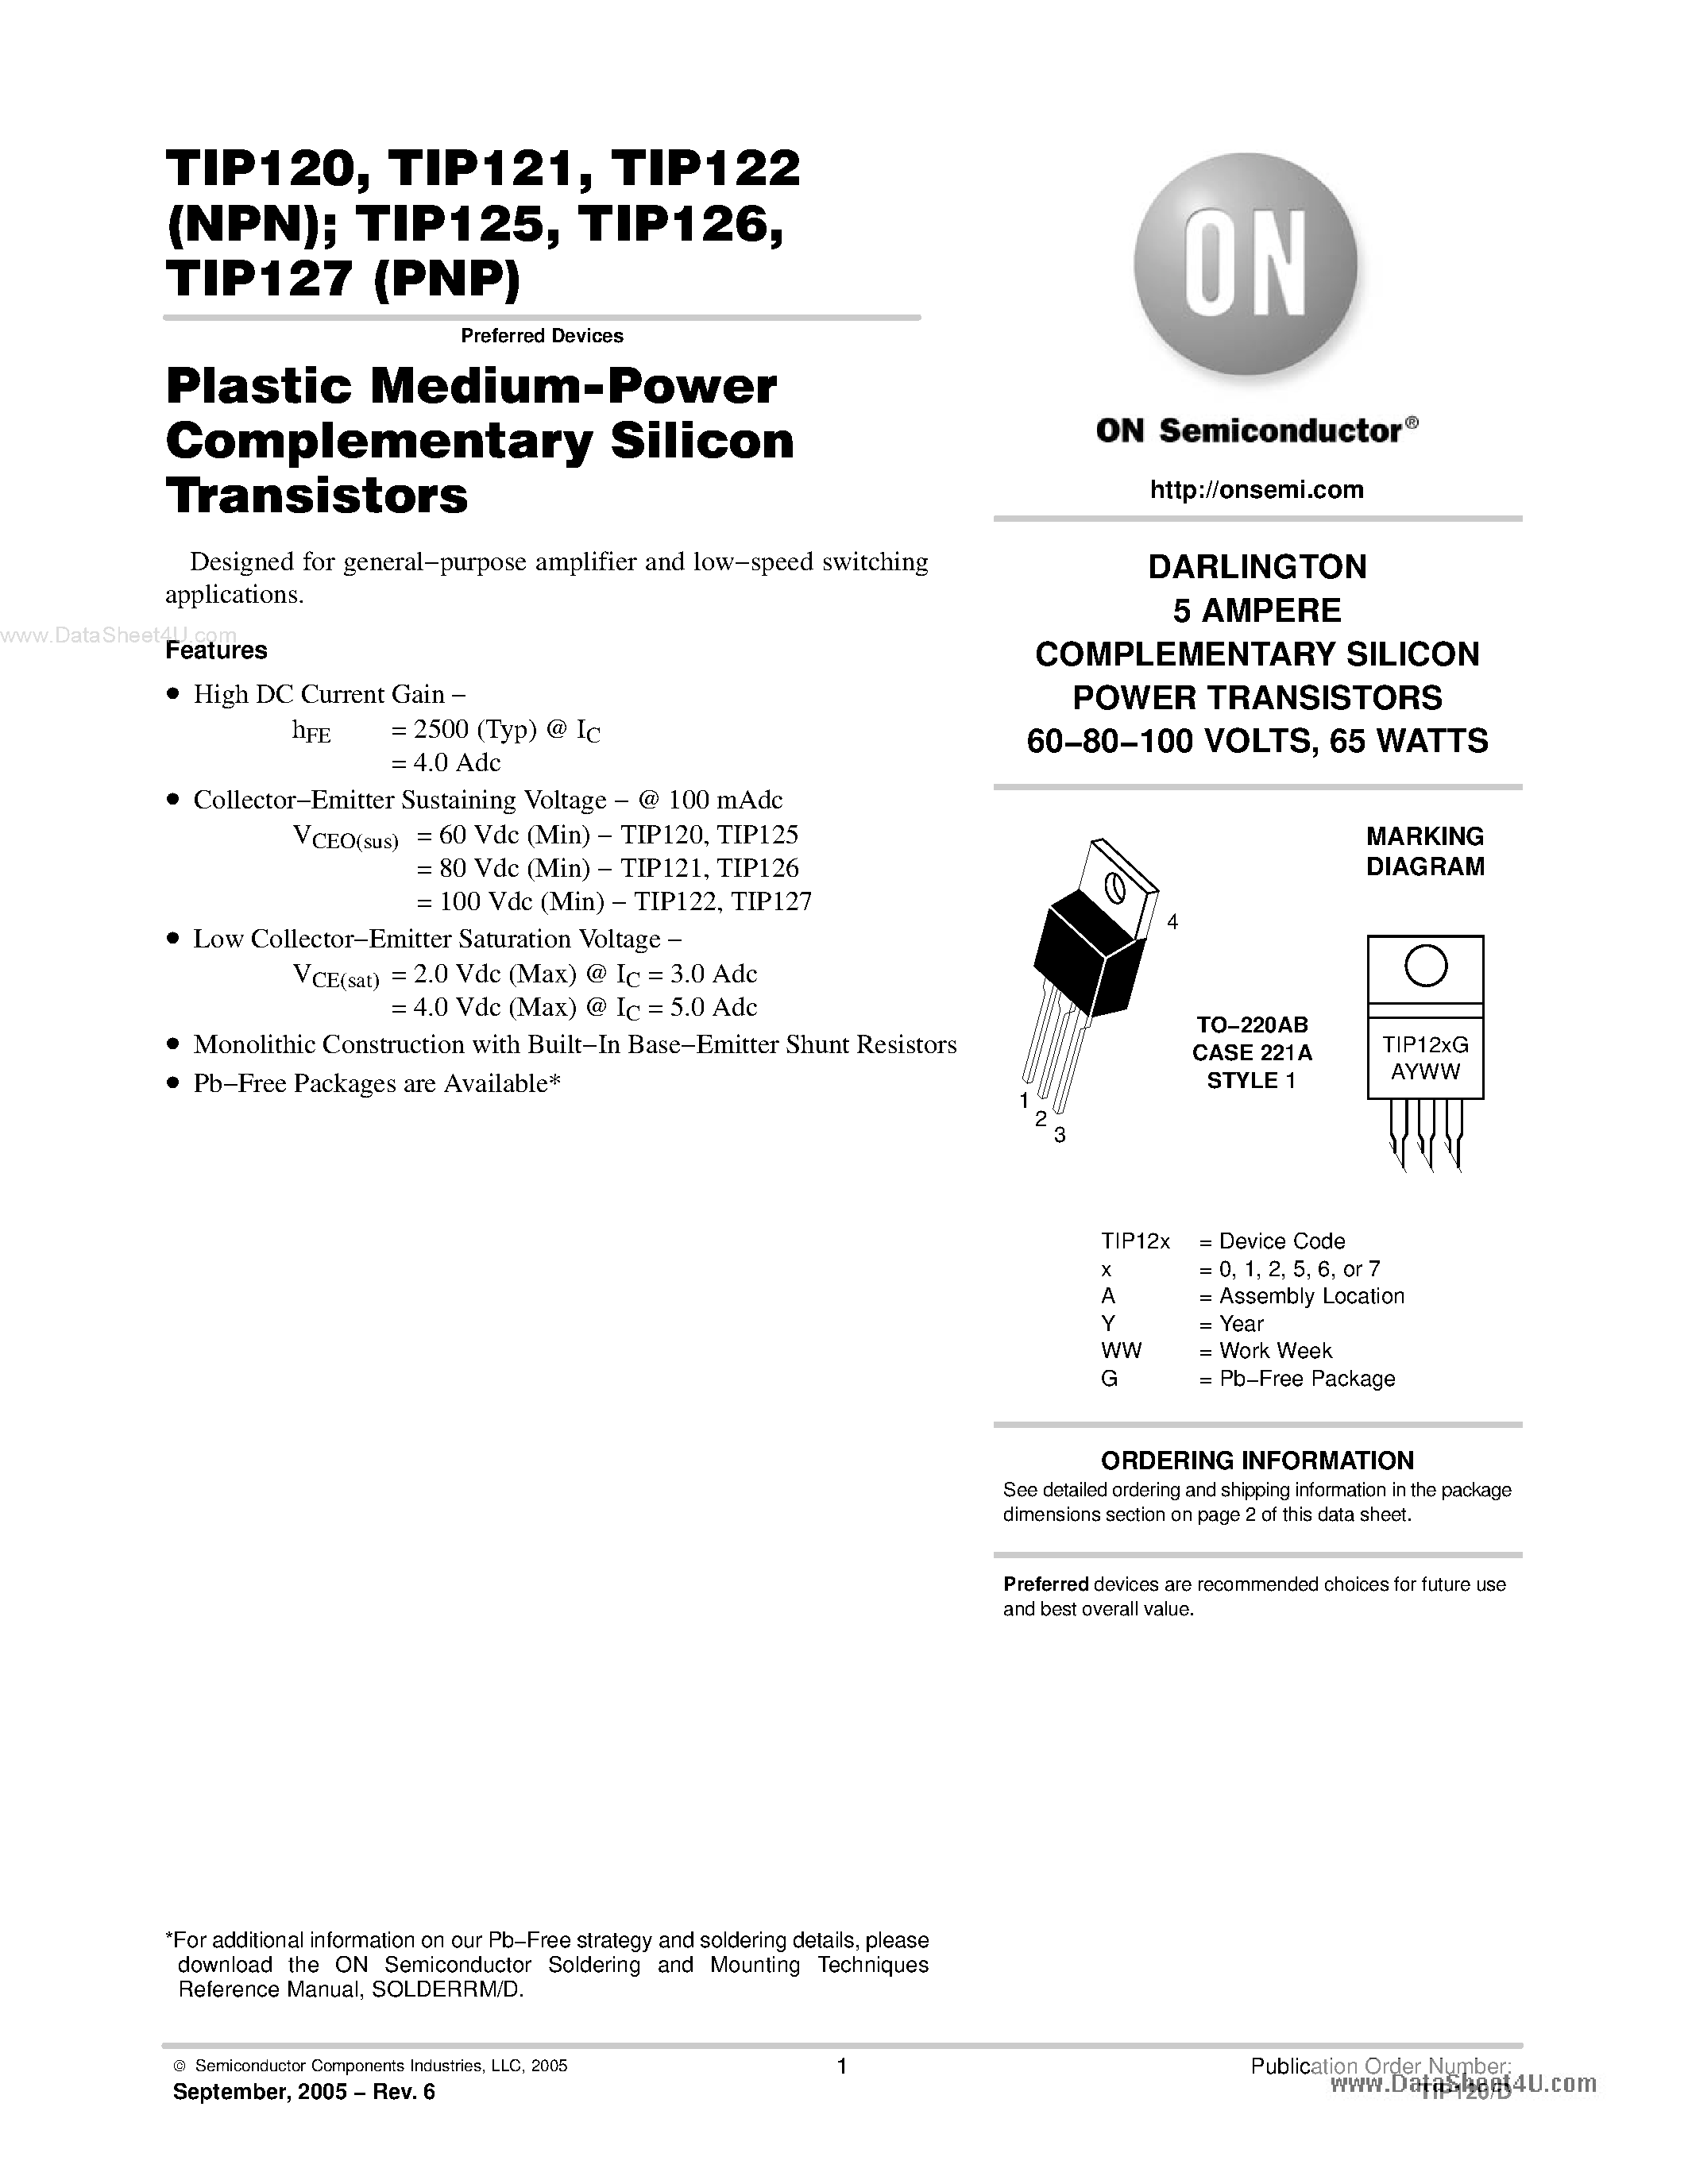 Datasheet TIP120 - (TIP120 - TIP127) Plastic Medium-Power Complementary Silicon Transistors page 1